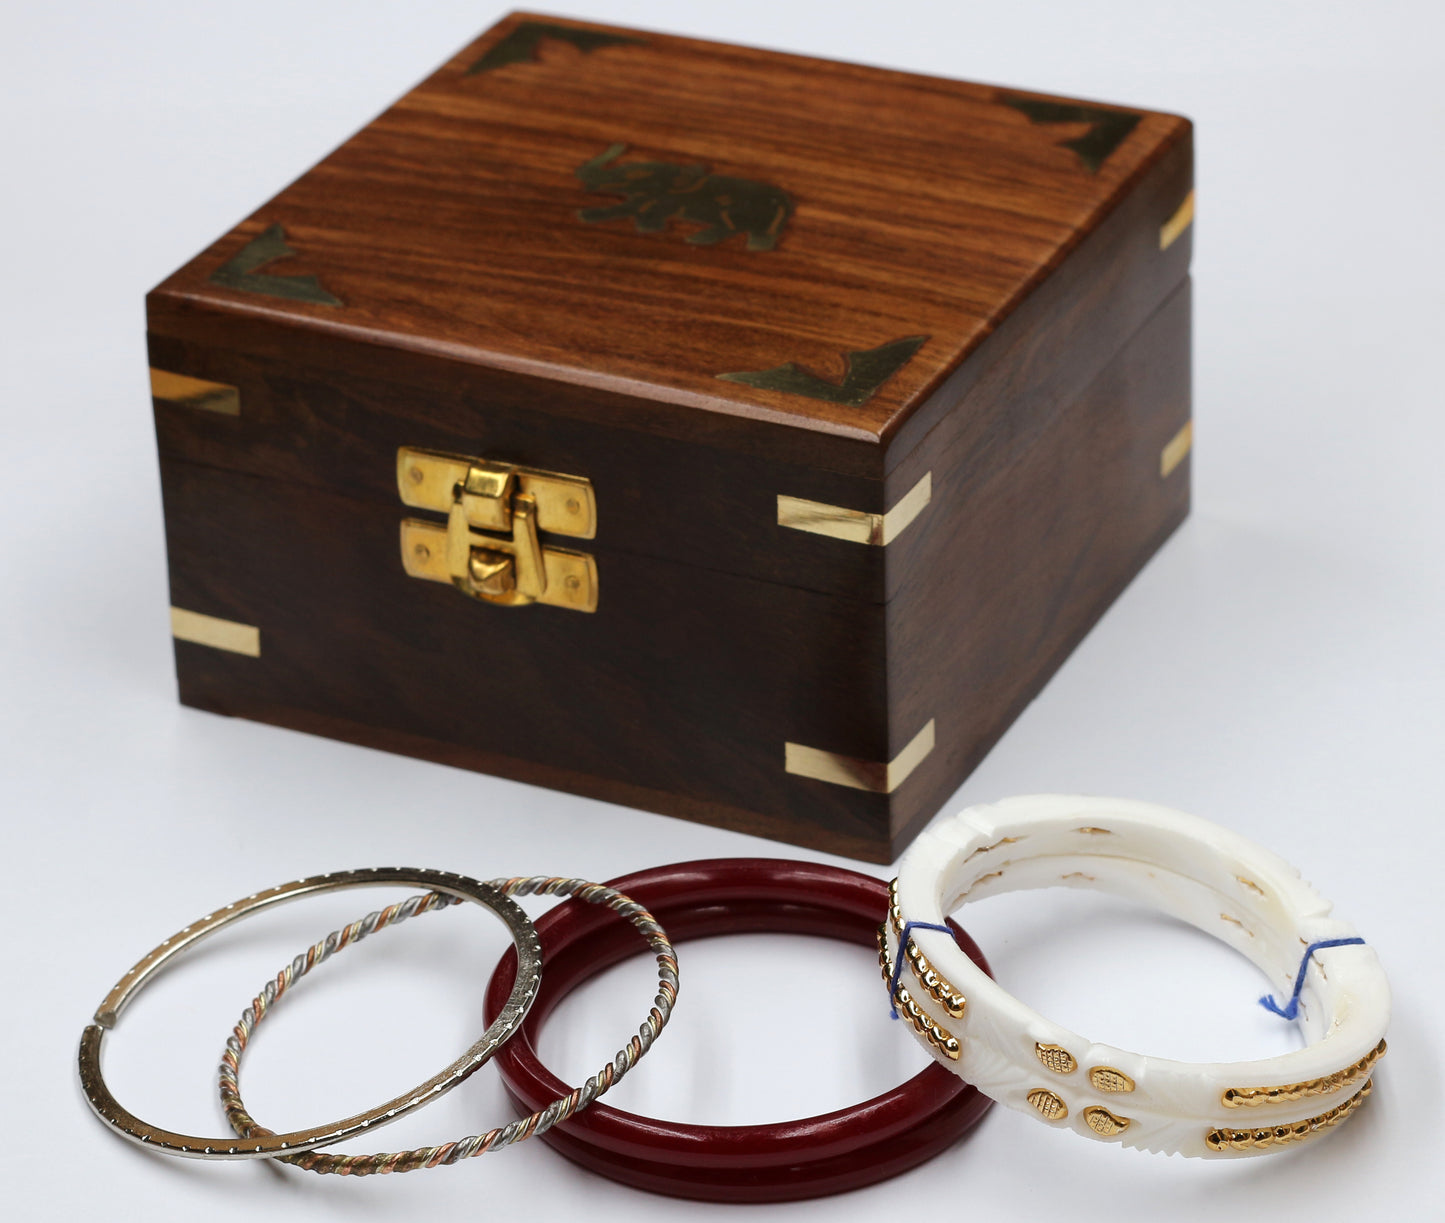 Centorganic Gold Plated sankha pola bangles for women, 1 pair of sankha, 1 pair of red pola, 2 iron noa, with free wooden jewellery box. (Design code: CSBM01)